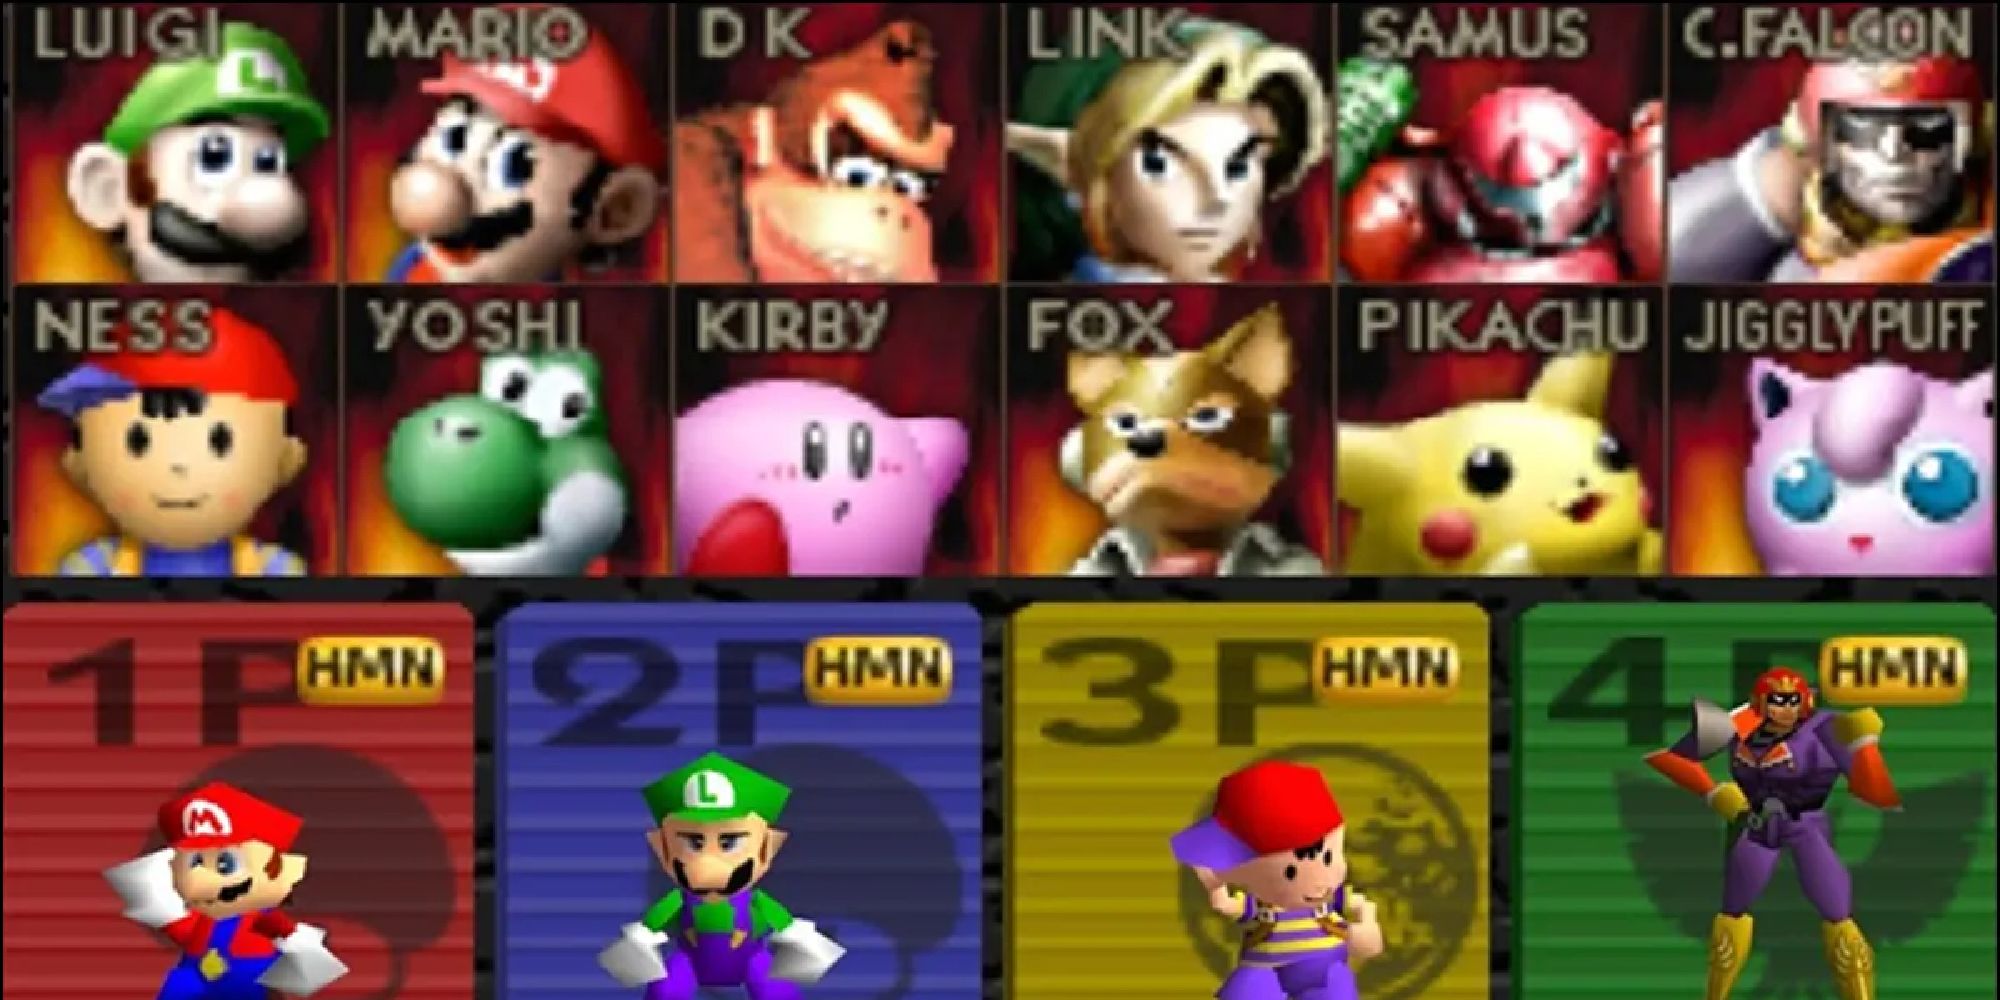 The character select screen in Super Smash Bros with the original 12 characters